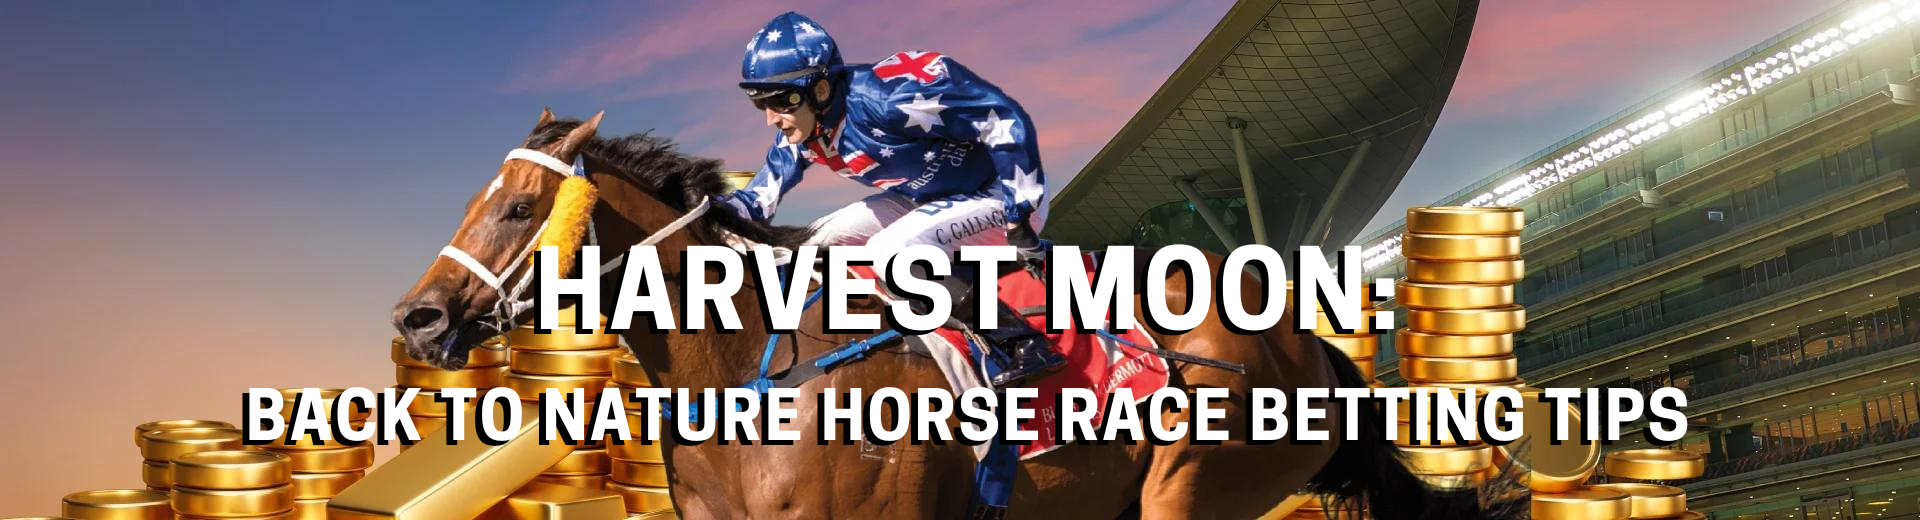 Harvest Moon Back to Nature Horse Race Betting Tips